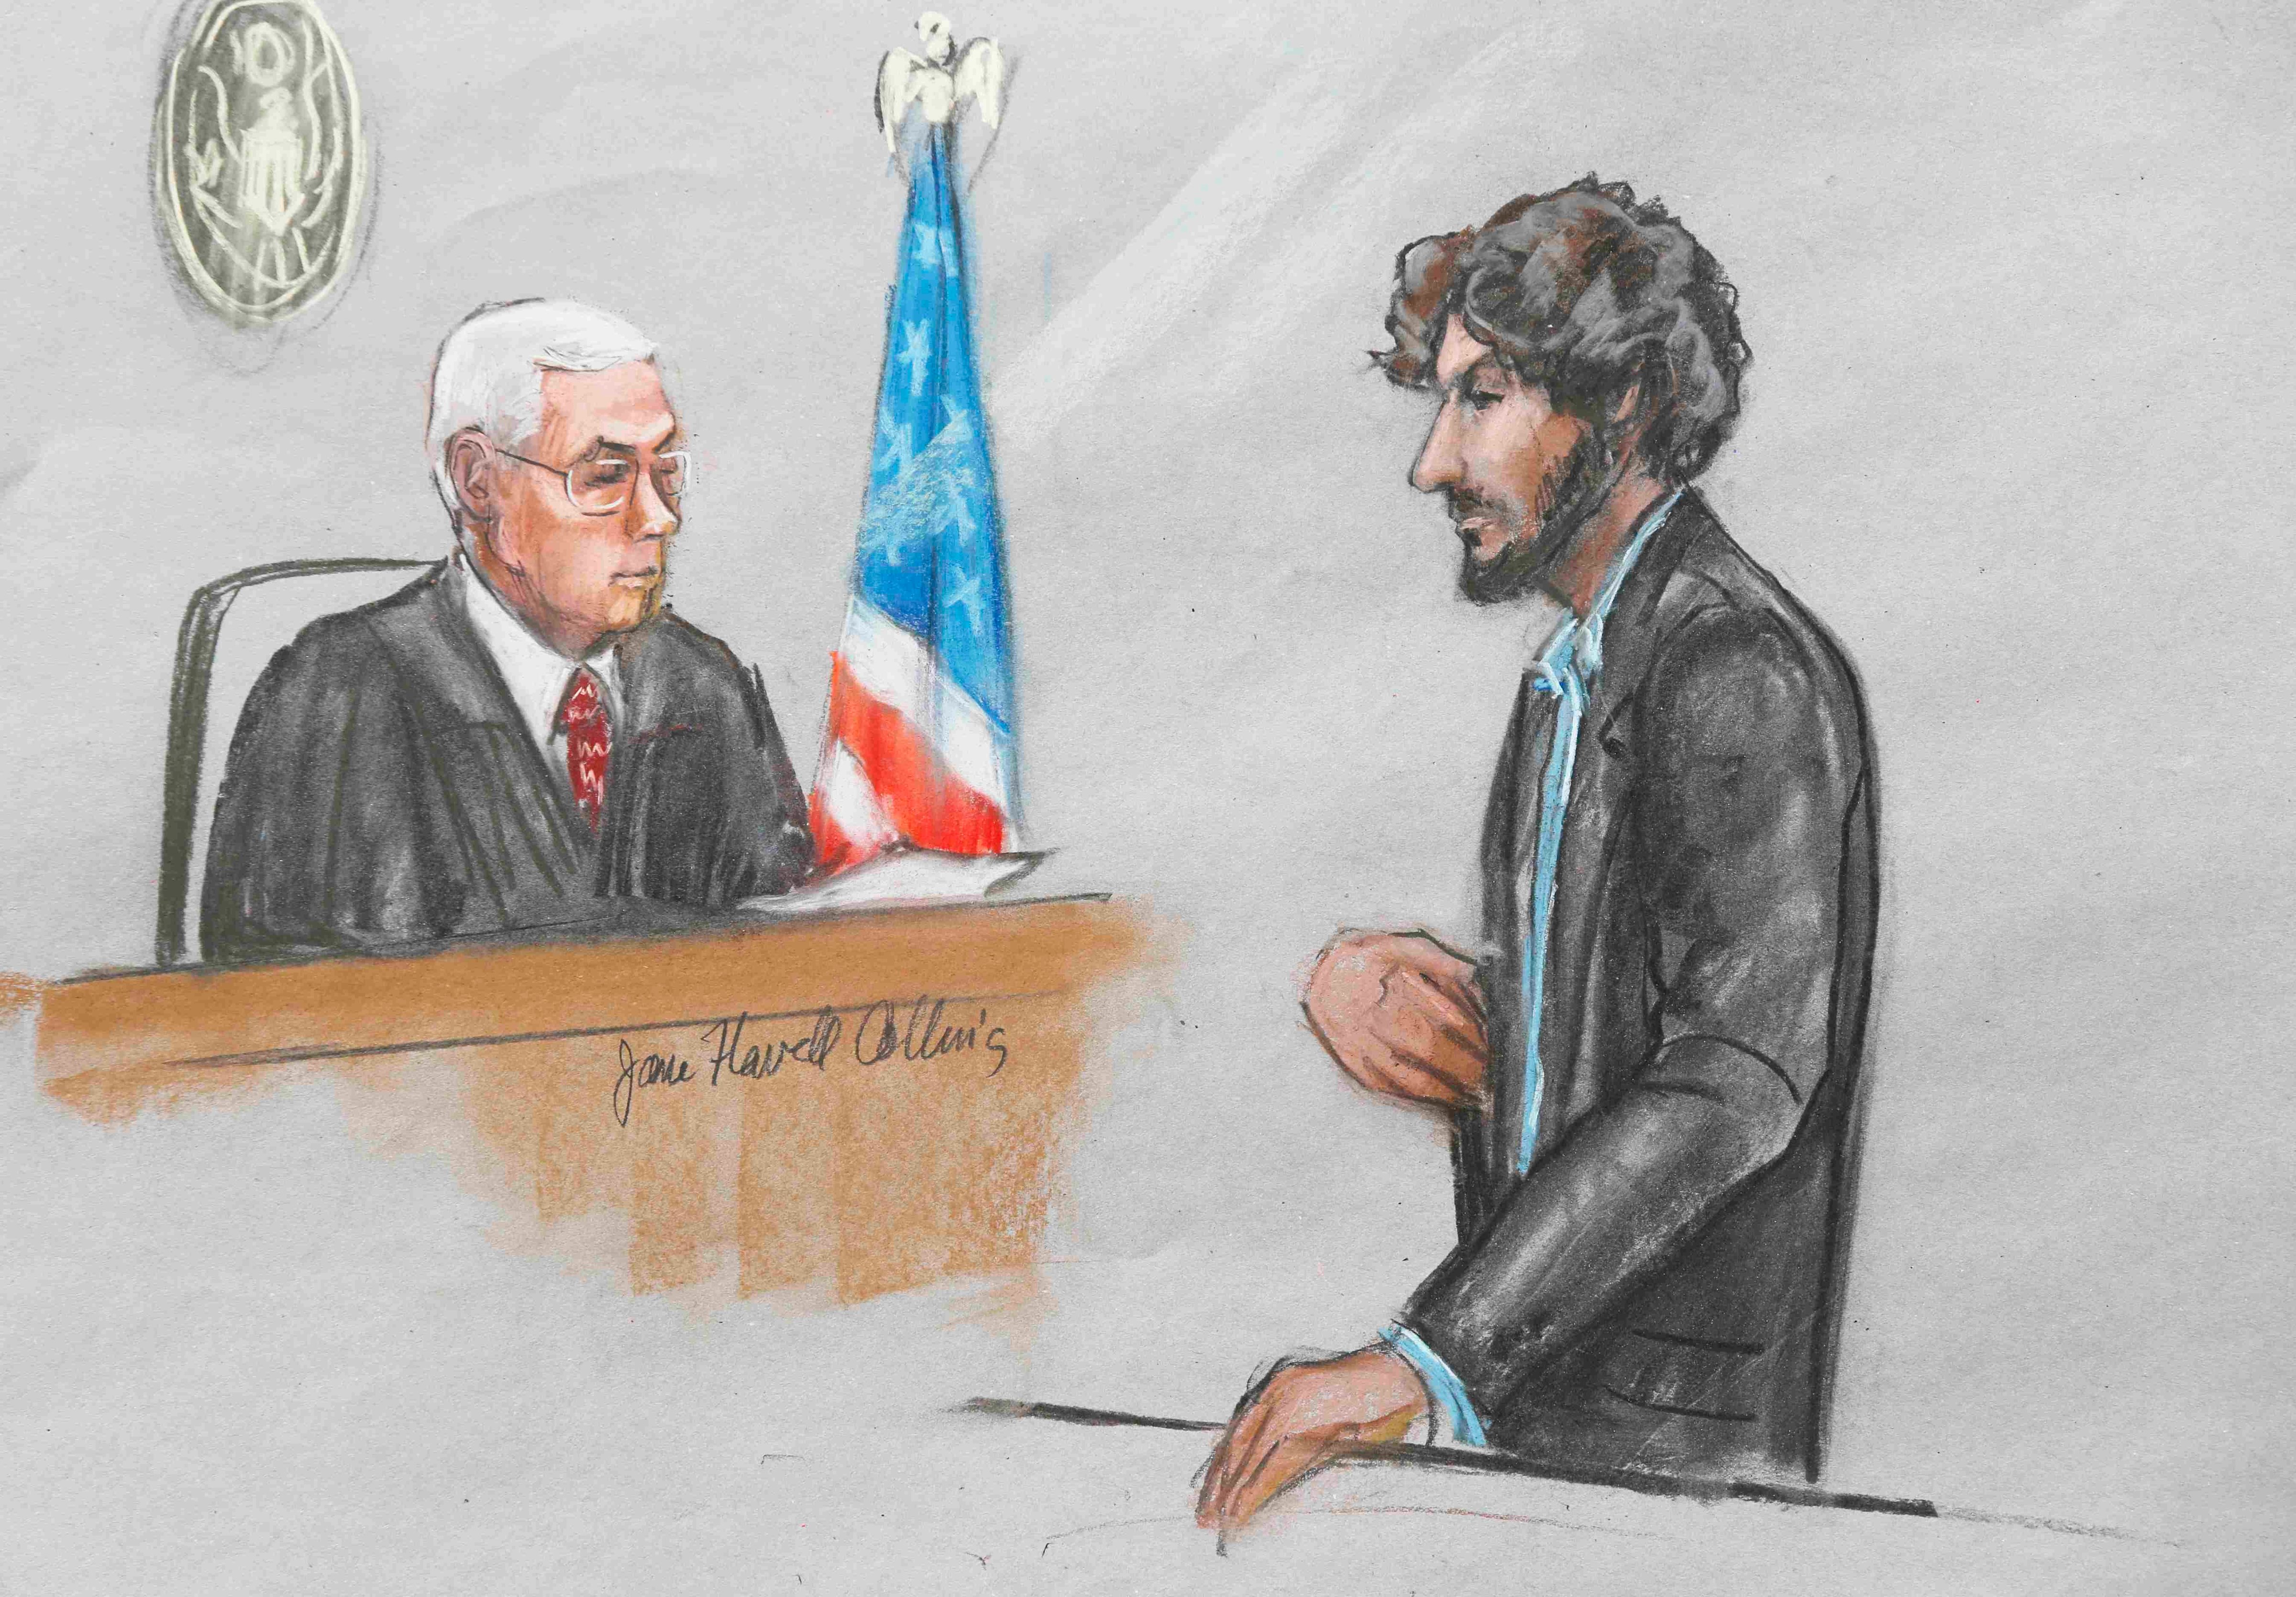 A courtroom sketch shows Boston Marathon bomber Dzhokhar Tsarnaev (R) speaking as U.S. District Judge George O'Toole looks on during his sentencing hearing in Boston, Mass. on June 24, 2015. (Jane Flavell Collins—Reuters)